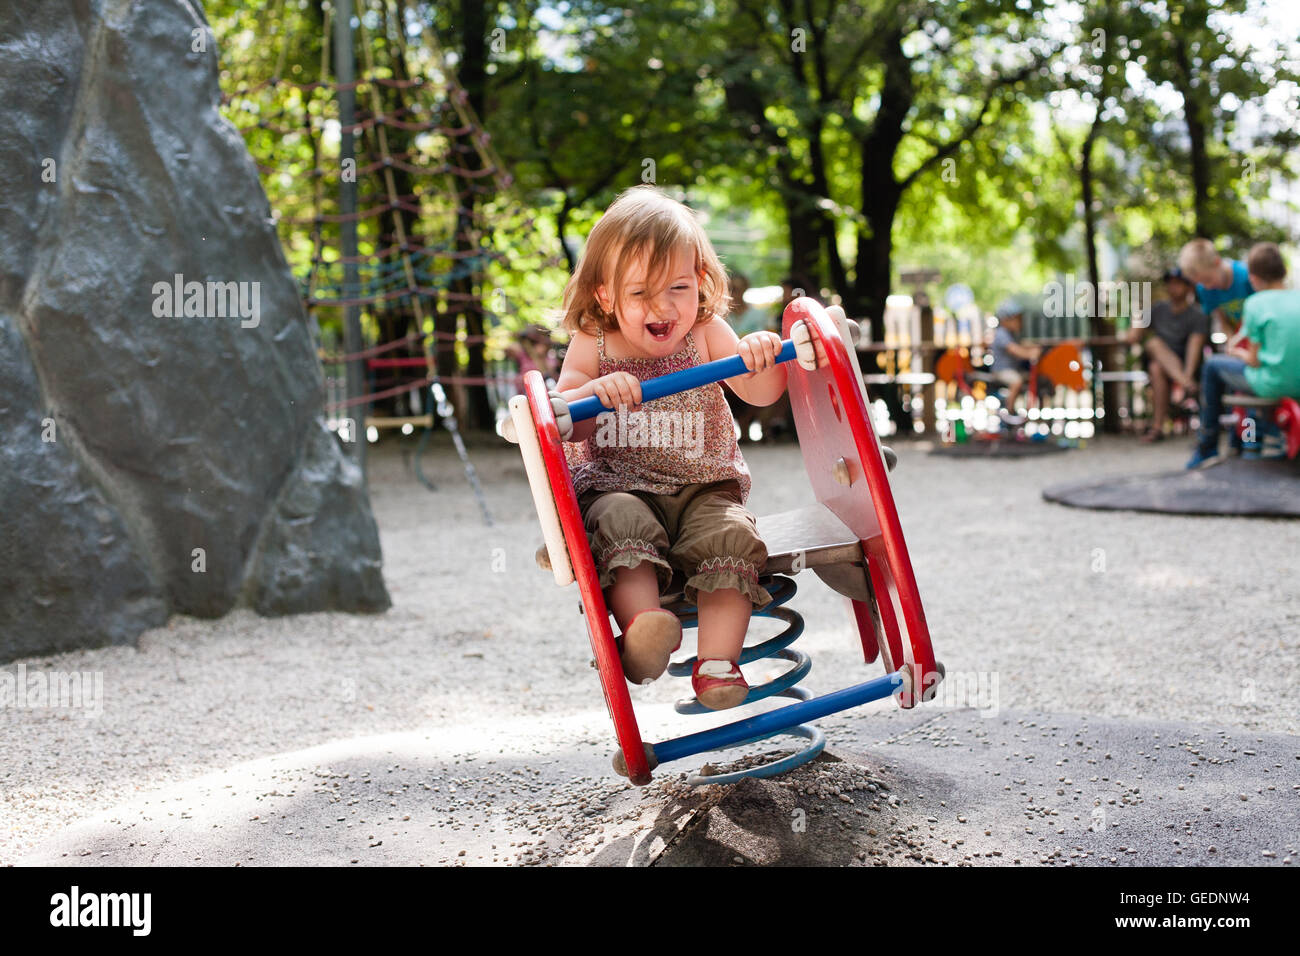 16 month old girl playing in the playground of a beer garden. Stock Photo